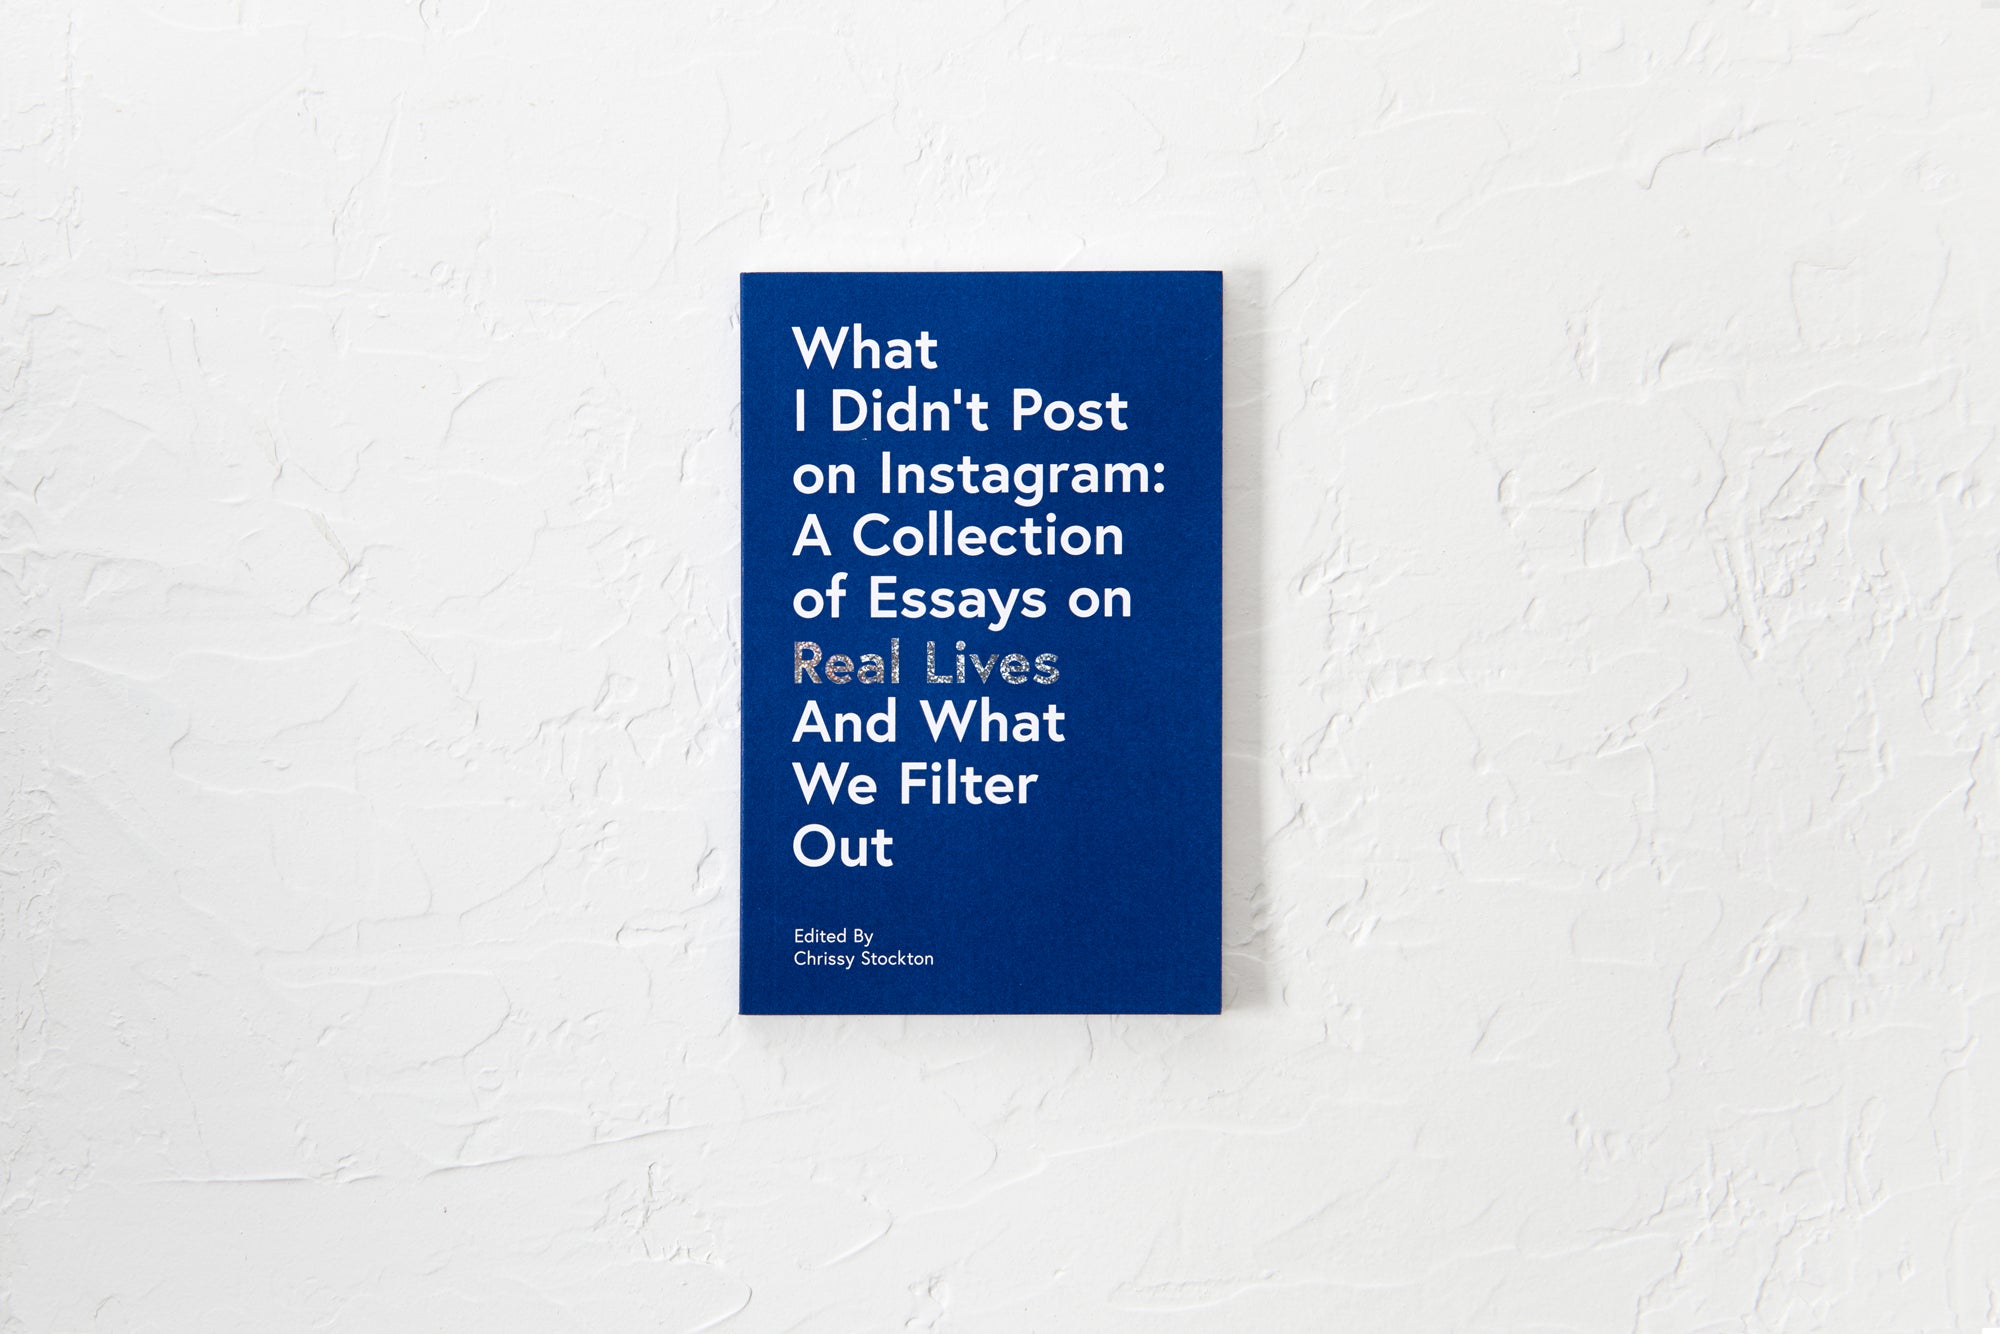 What I Didn’t Post on Instagram: A Collection of Essays on Real Lives and What We Filter Out